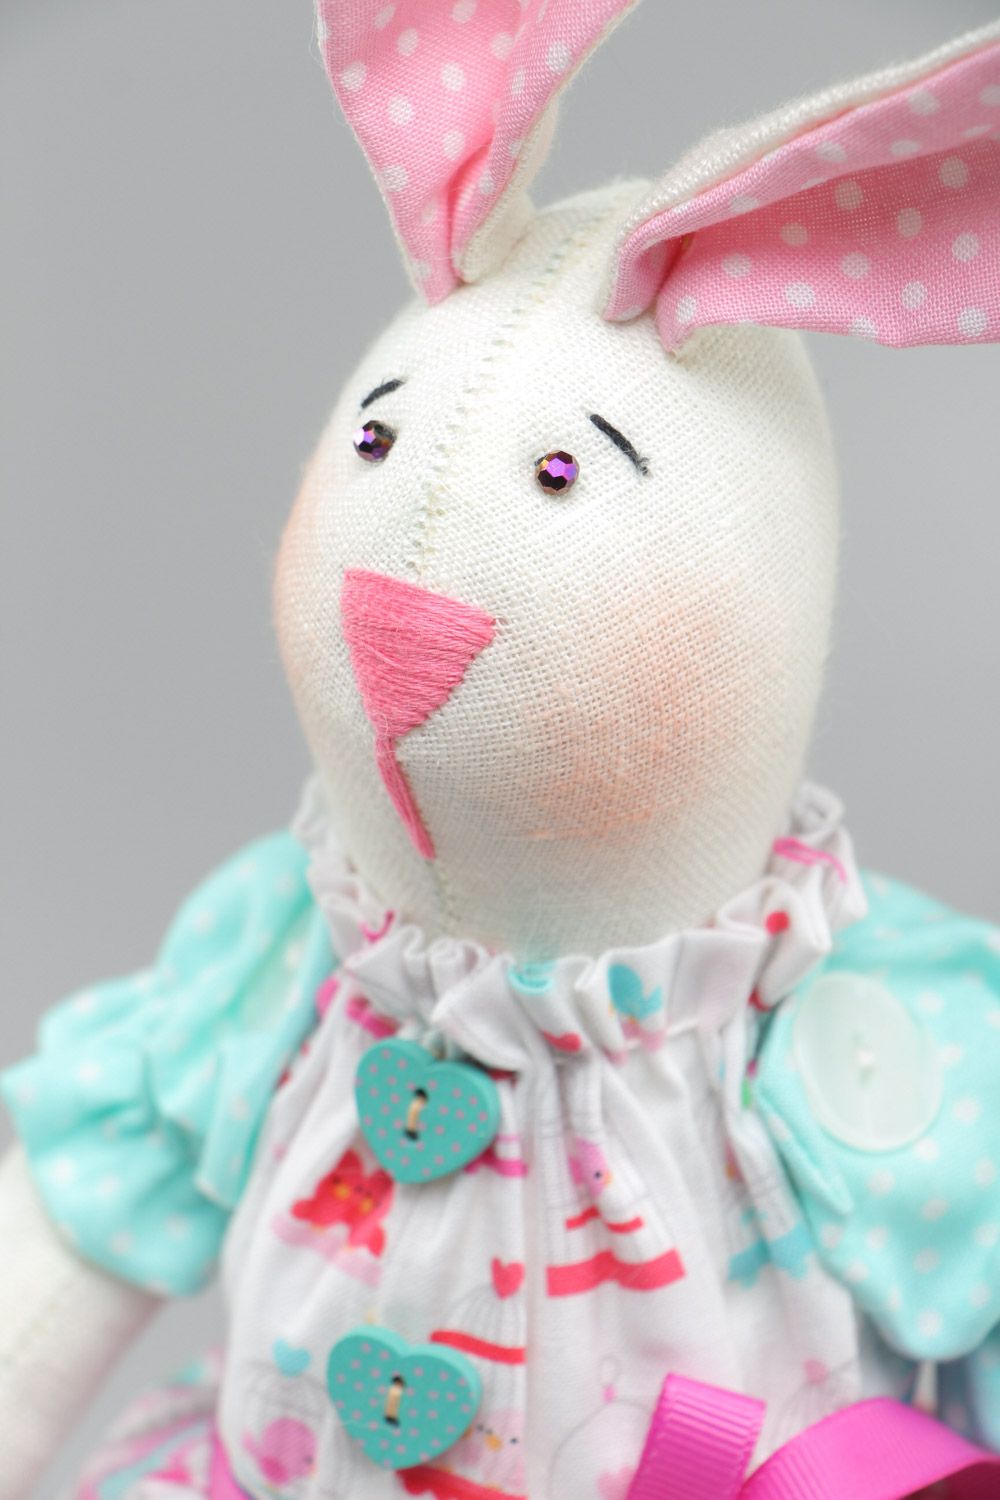 Cute handmade soft toy sewn of natural fabrics Rabbit with pink ears and dress photo 3